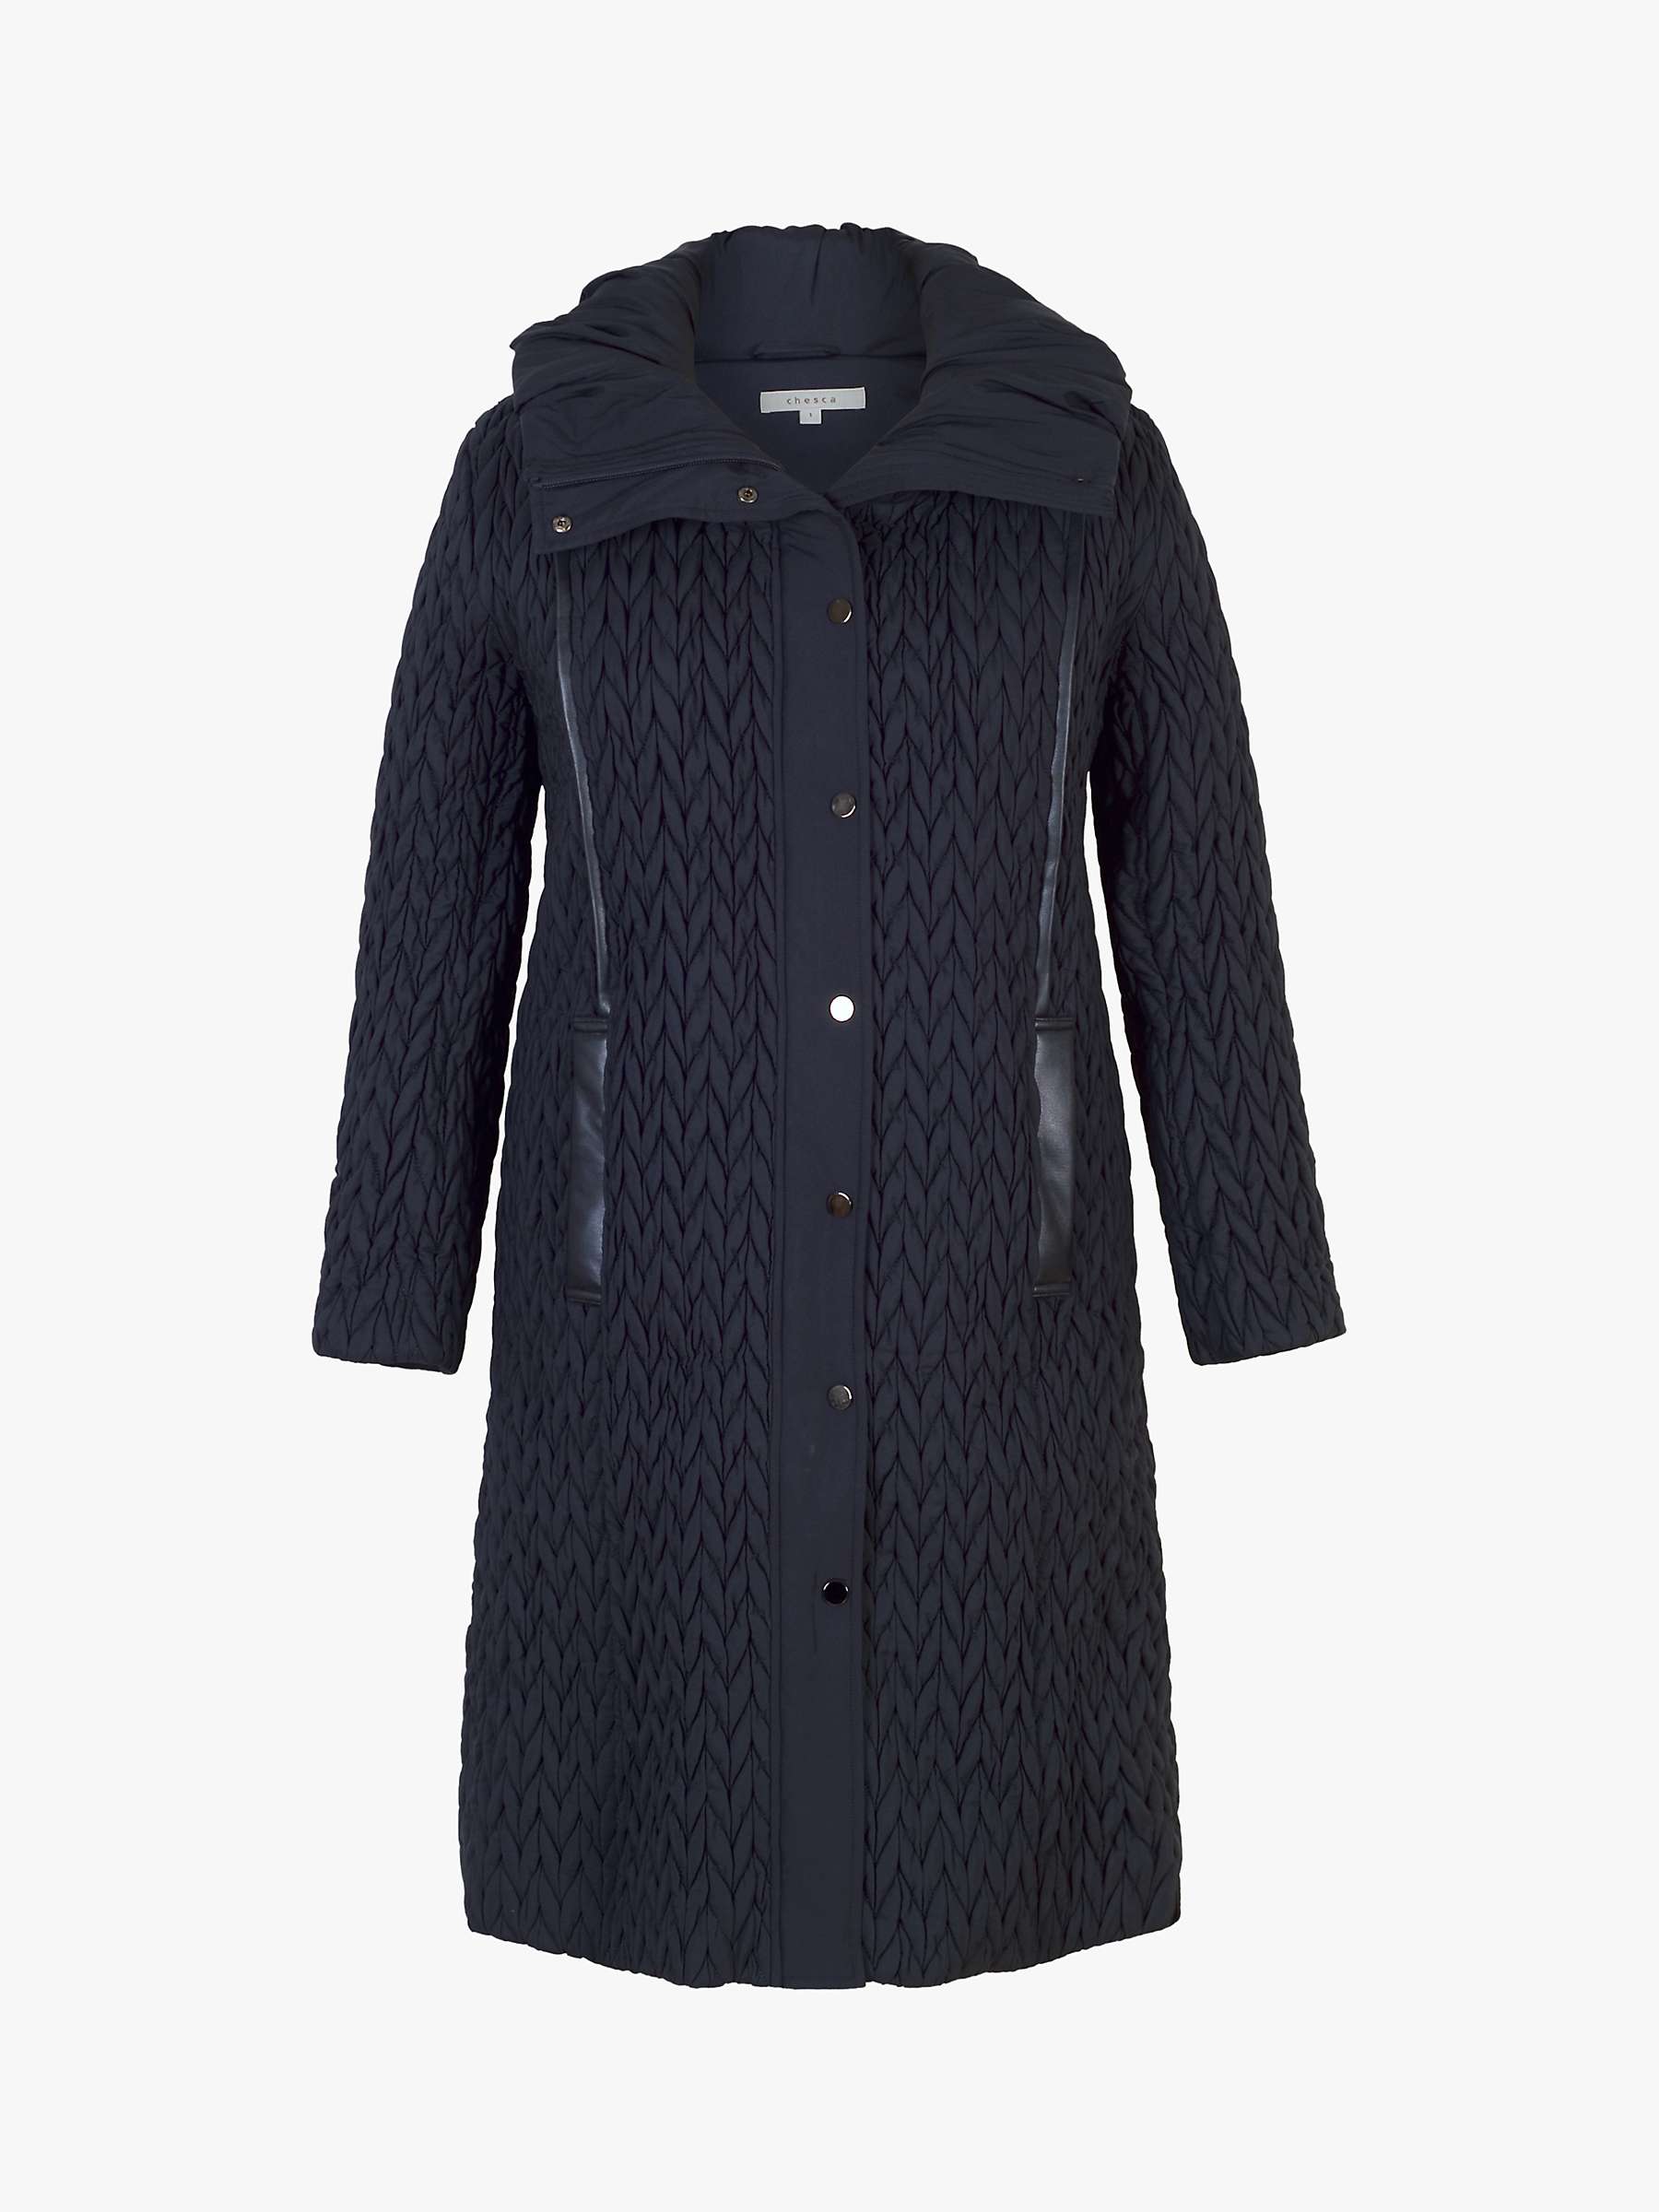 Chesca Embroidered Quilted Coat, Navy at John Lewis & Partners